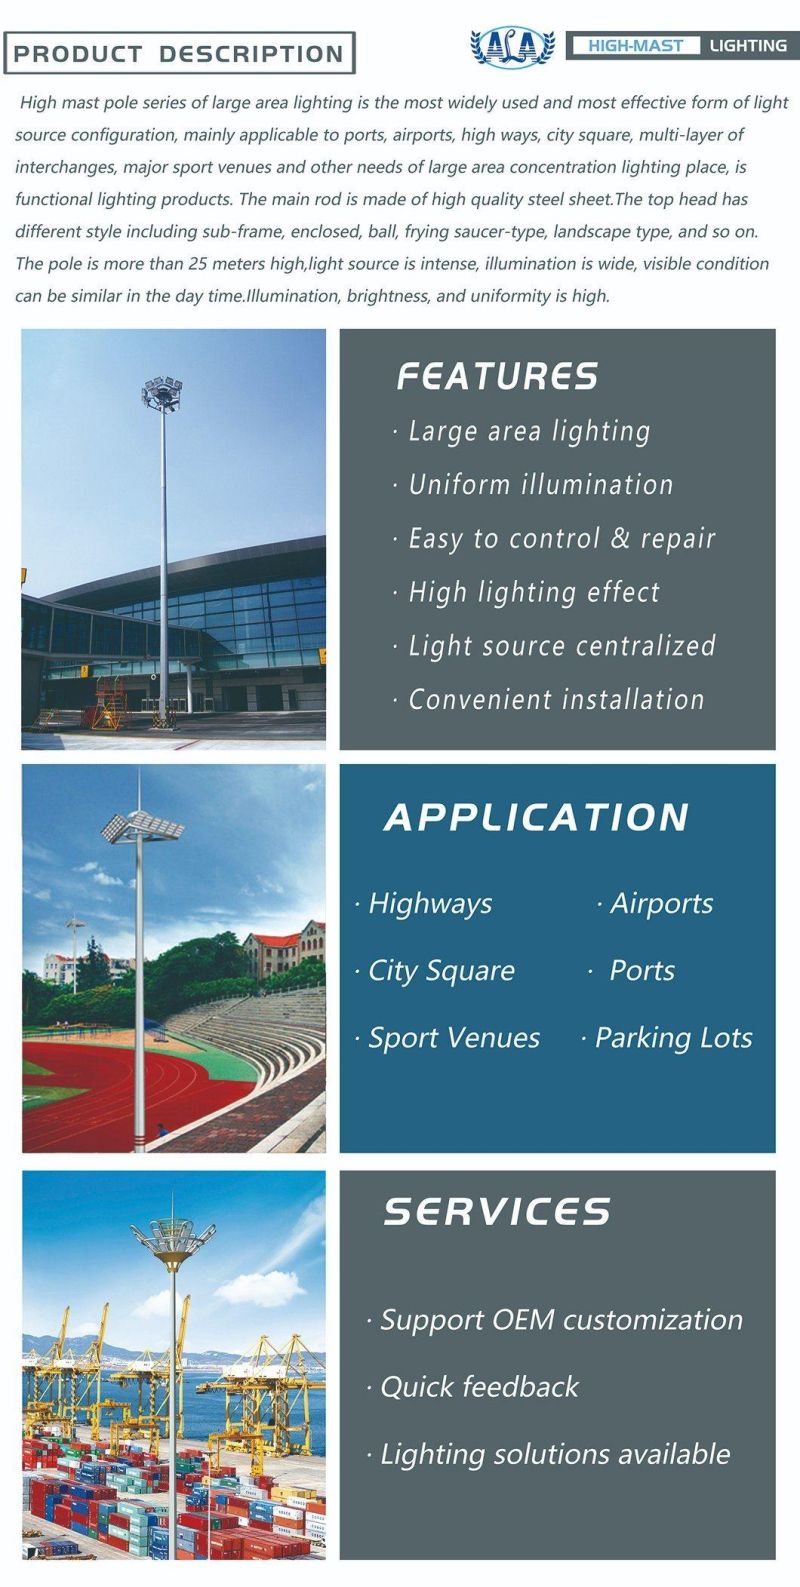 Ala Hot Sale Steel Round 600W High Mast Light with Pole Light for Outdoor Lighting 15m 20m 25m 30m